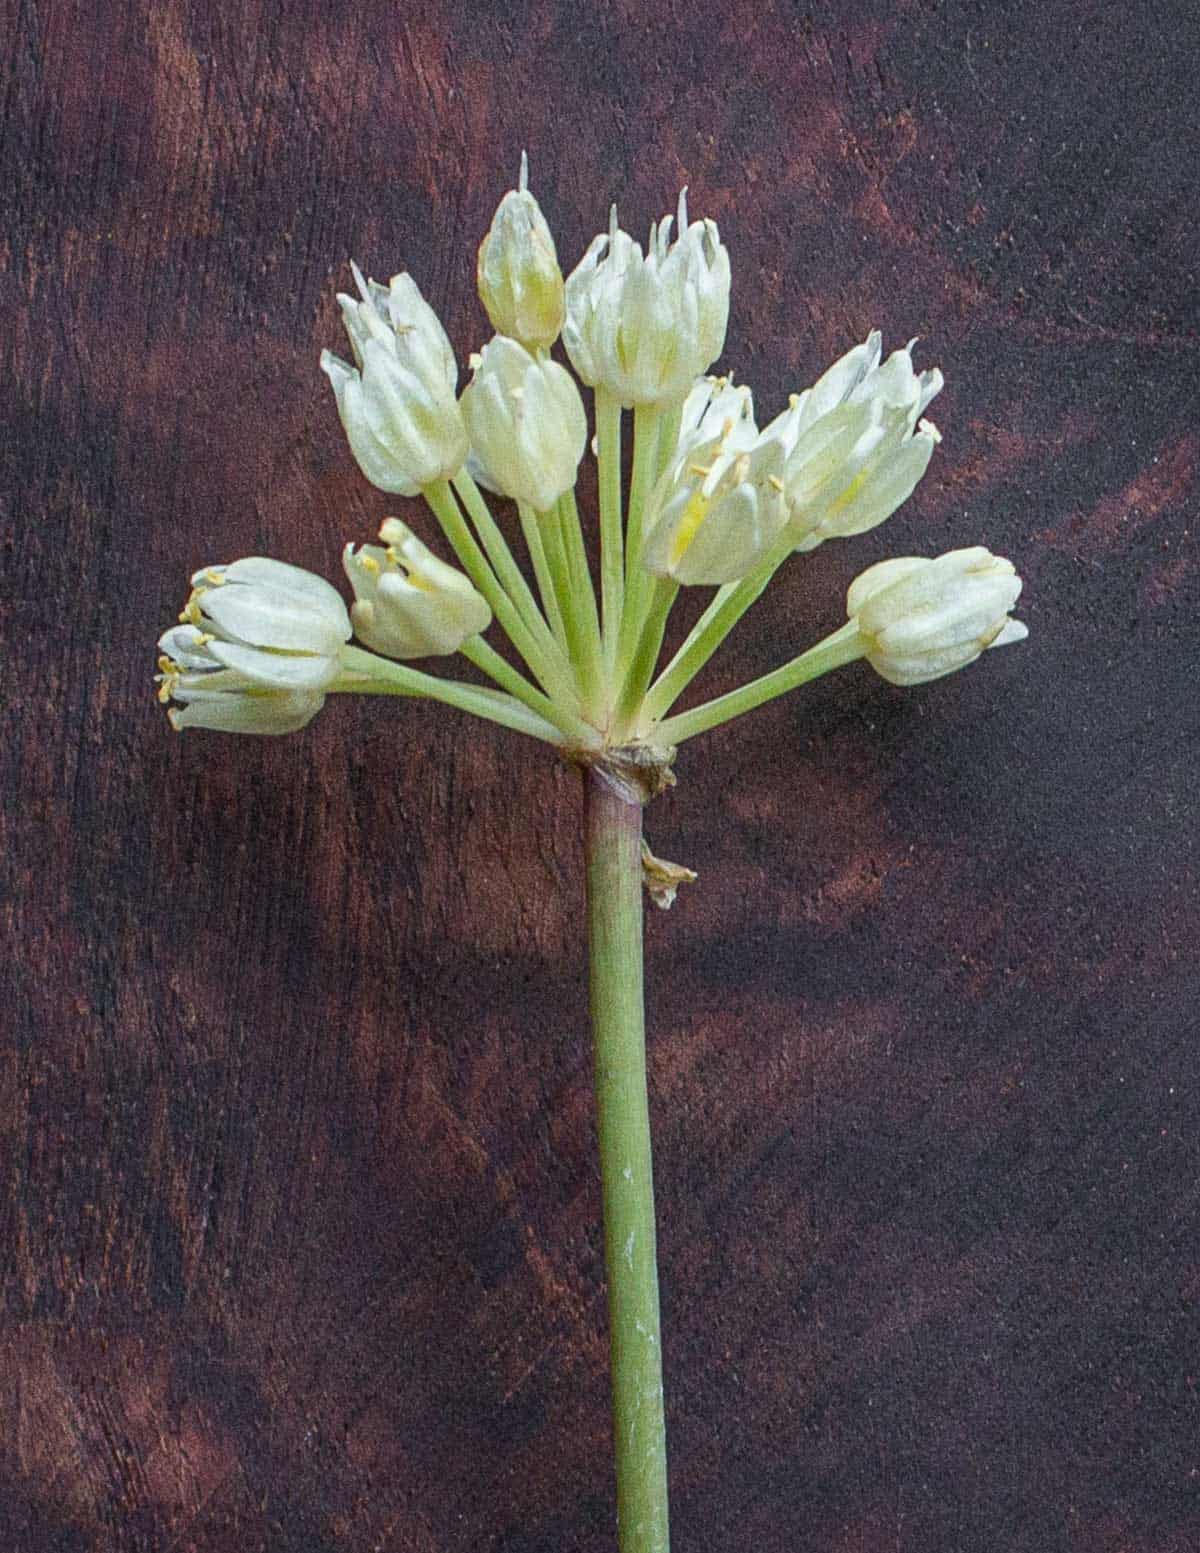 A close up picture of ramp or wild garlic flowers. 